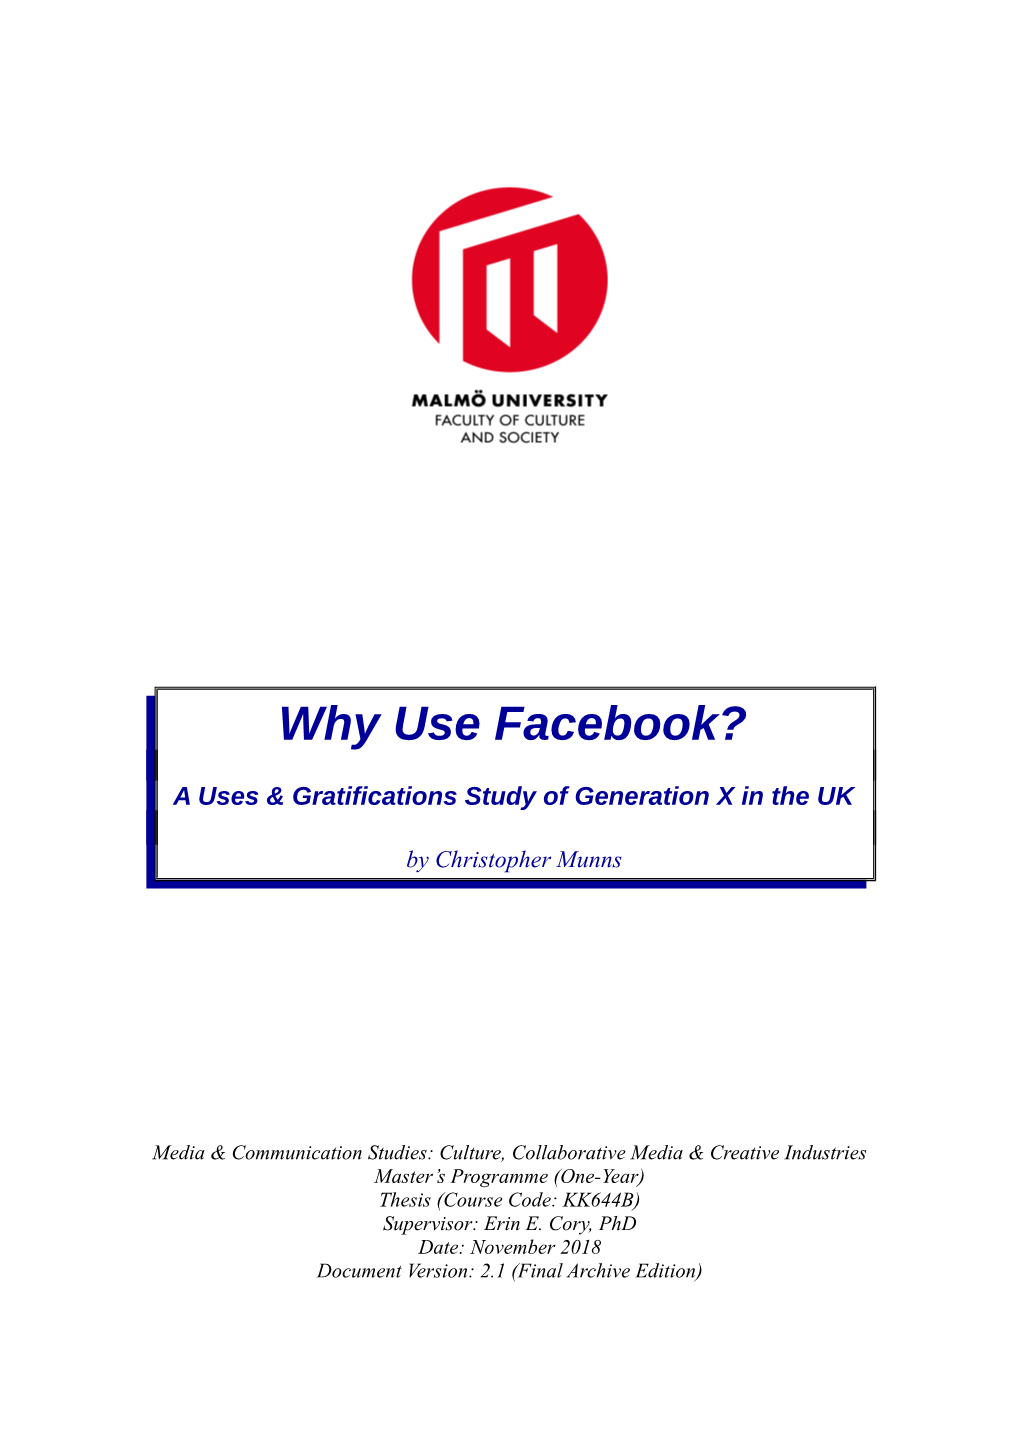 Why Use Facebook? a Uses & Gratifications Study of Generation X